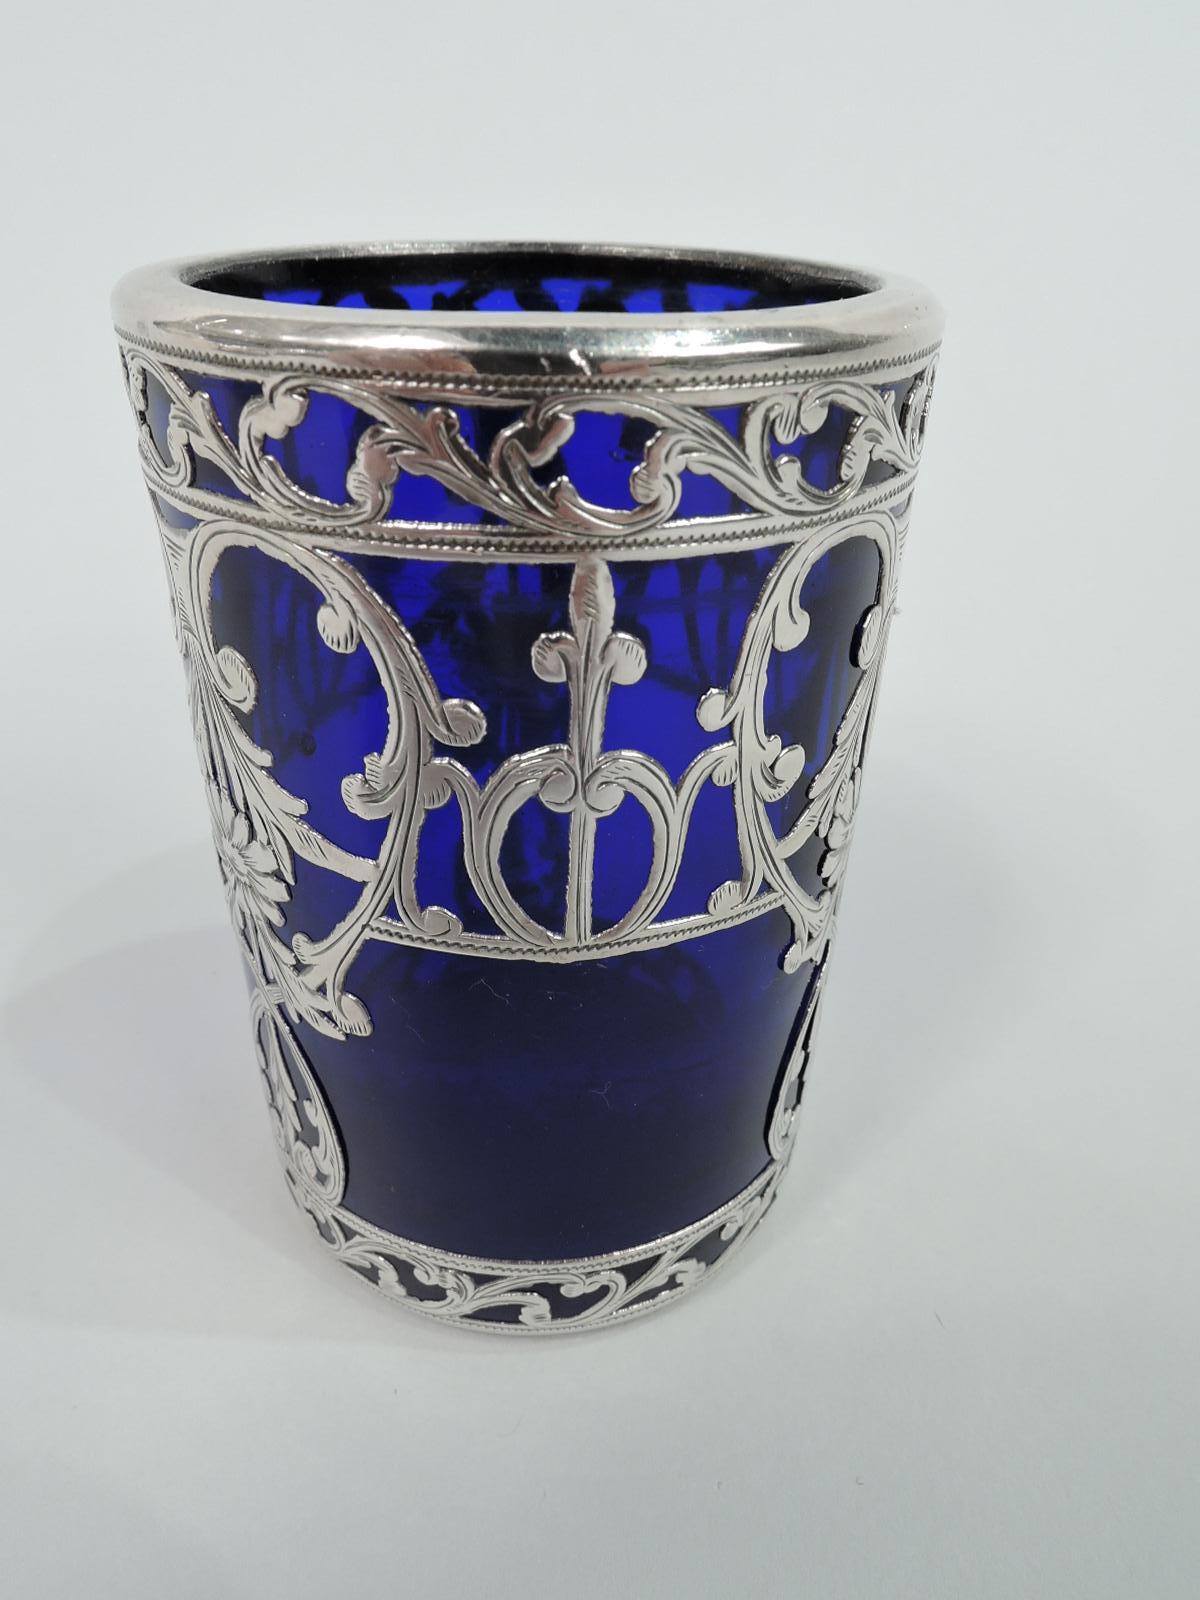 Turn-of-the-century glass bud vase with engraved silver overlay. Cylindrical beaker with flat rim in silver collar. Overlay patter comprising leafing scrolls and flowers between leafing-scroll borders. Glass is cobalt blue.